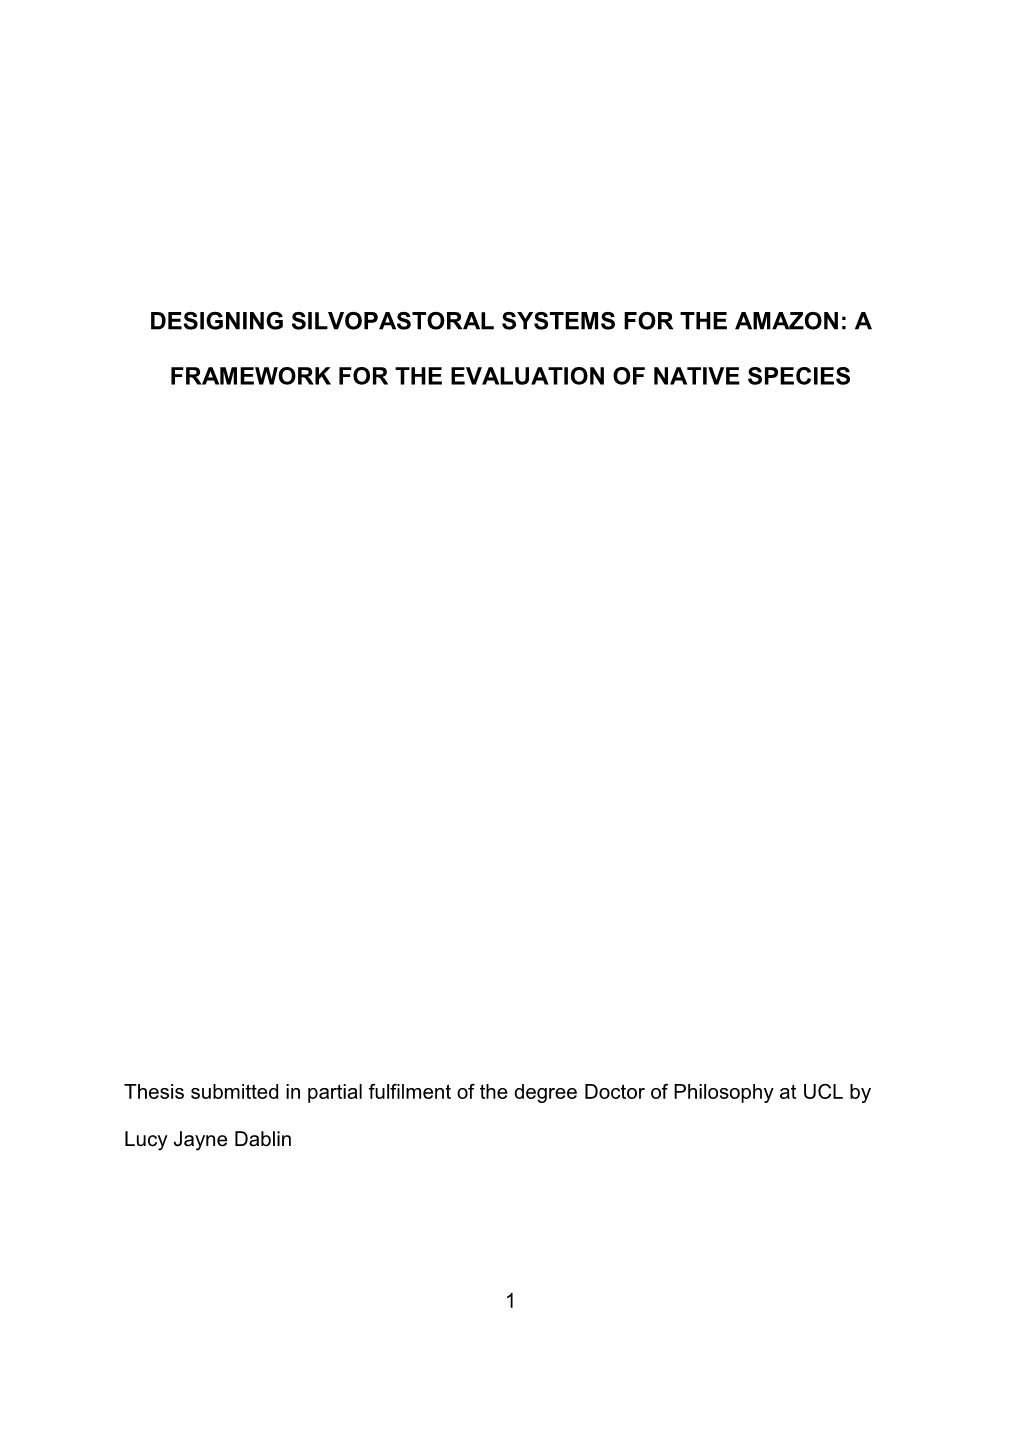 Designing Silvopastoral Systems for the Amazon: A